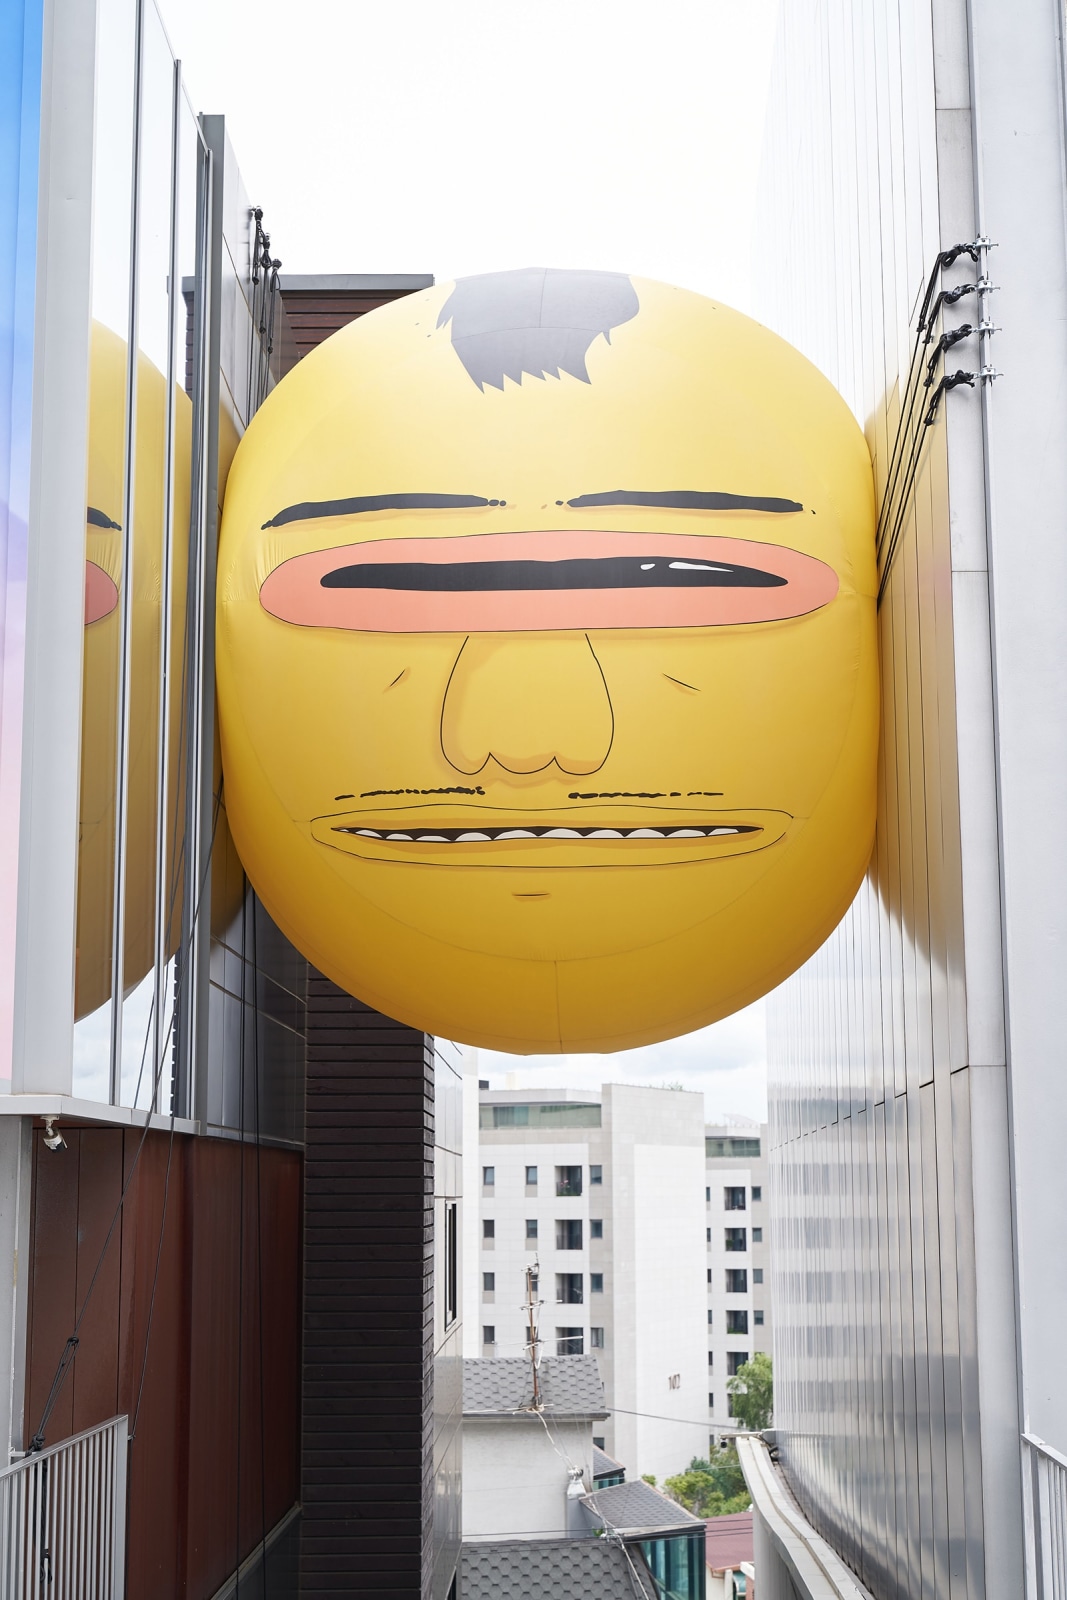 Exterior view of the exhibition OSGEMEOS: You Are My Guest in Seoul. Large yellow balloon with a face squeezed between two buildings